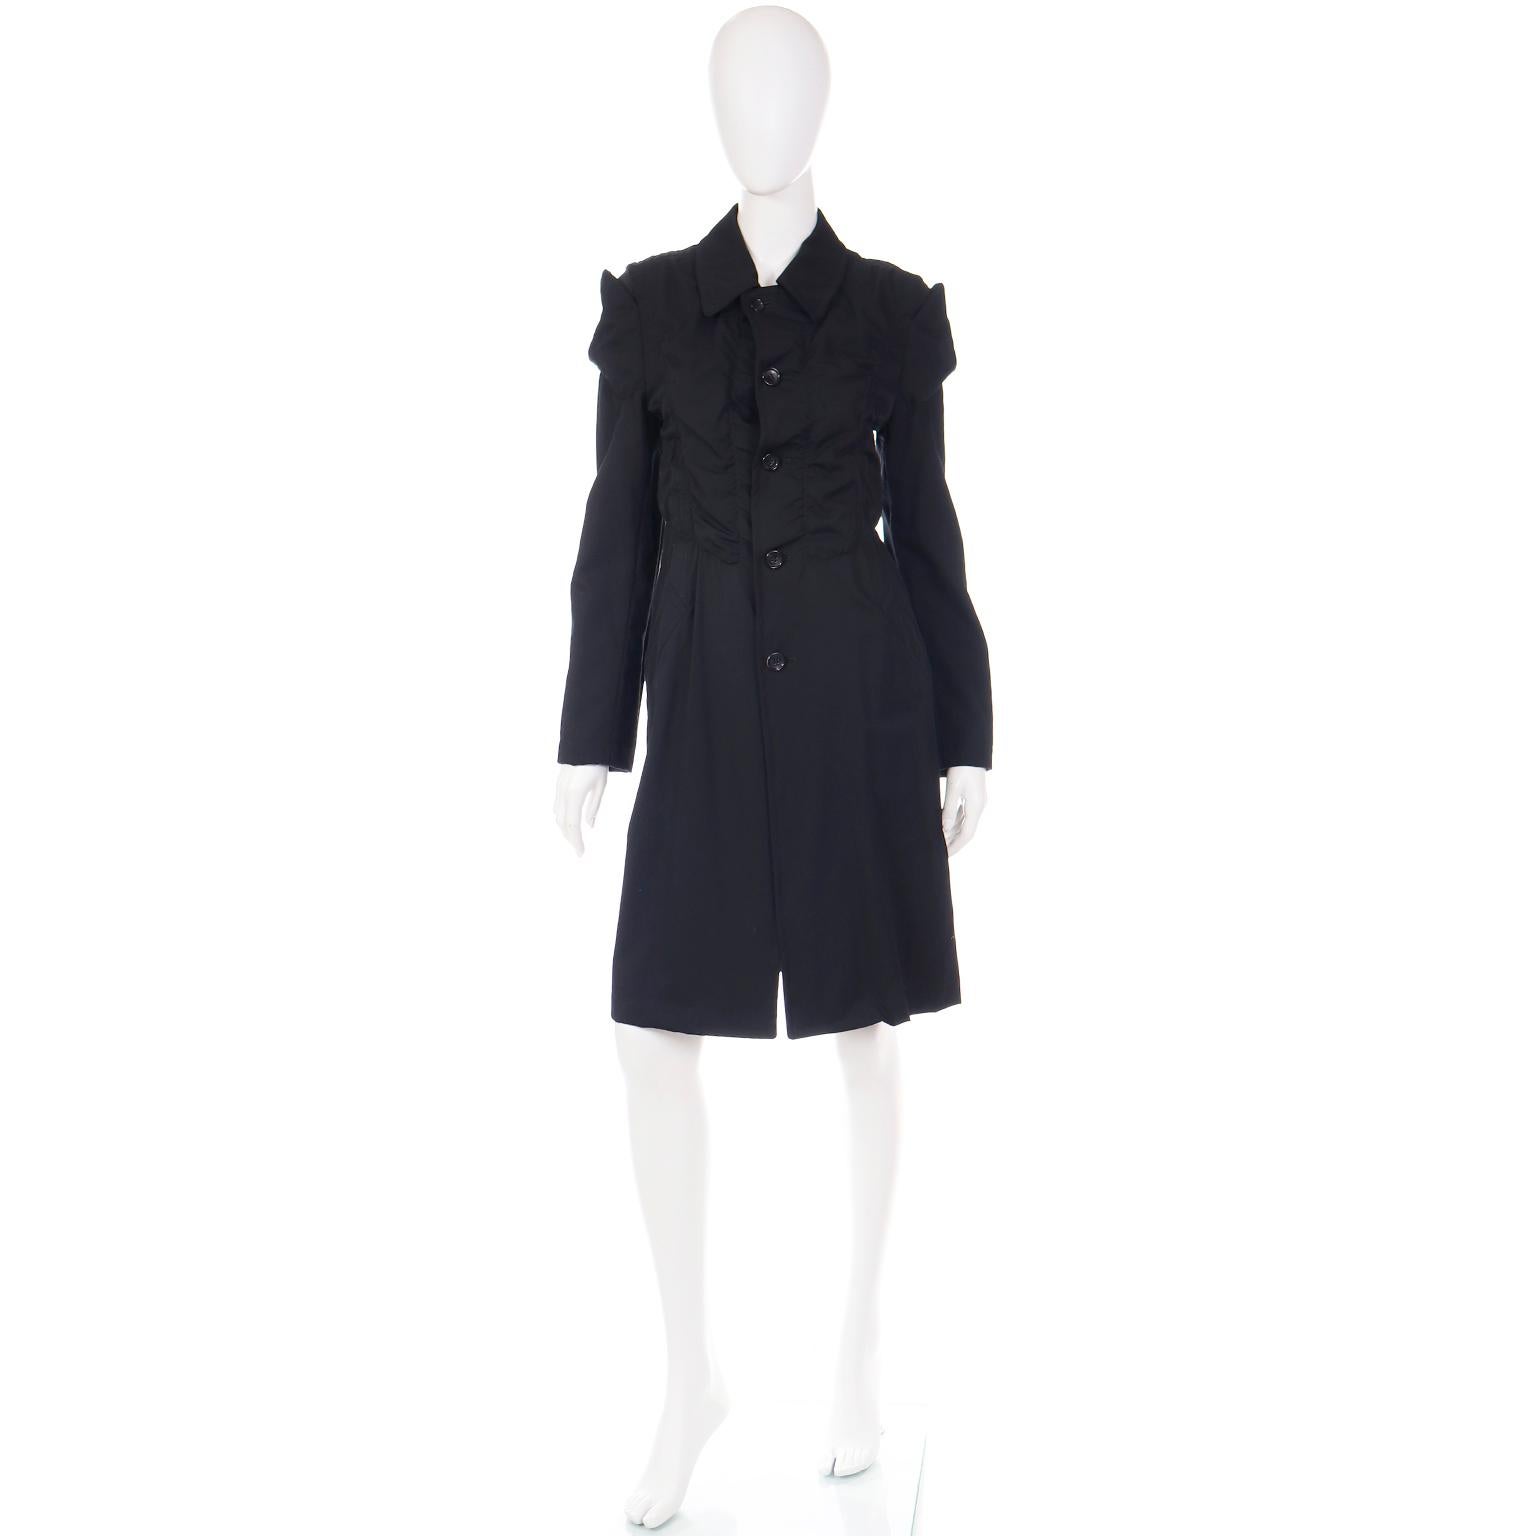 This is such a great Comme des Garcons coat with Rei Kawakubo's signature touches and beautiful ruching on the bodice. The coat has front side slash pockets and buttons up the center front. There is a center back 19